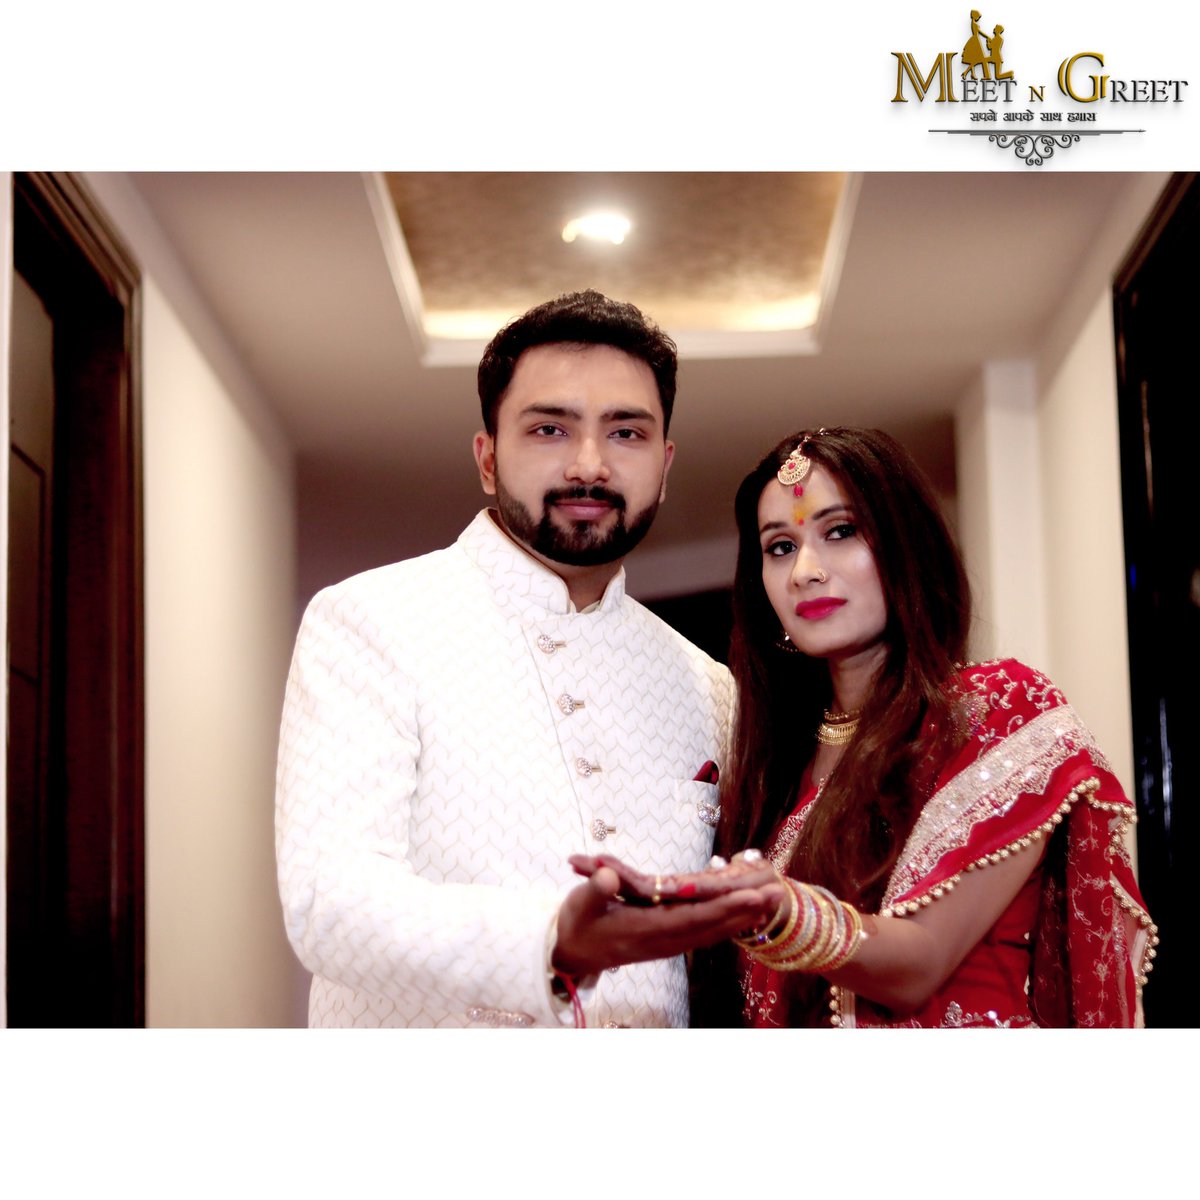 Get your pre wedding/wedding booked now.
Contact: +91- 9140589668
Whatsapp: +91-7985562592
Mail us at: info.meetngreetevents@gmail.com
#meetngreetevents
#meetngreet 
#ringceremony #photography #candidshot #canonphotography #Photoshop #photographer #Photos #Ceremony